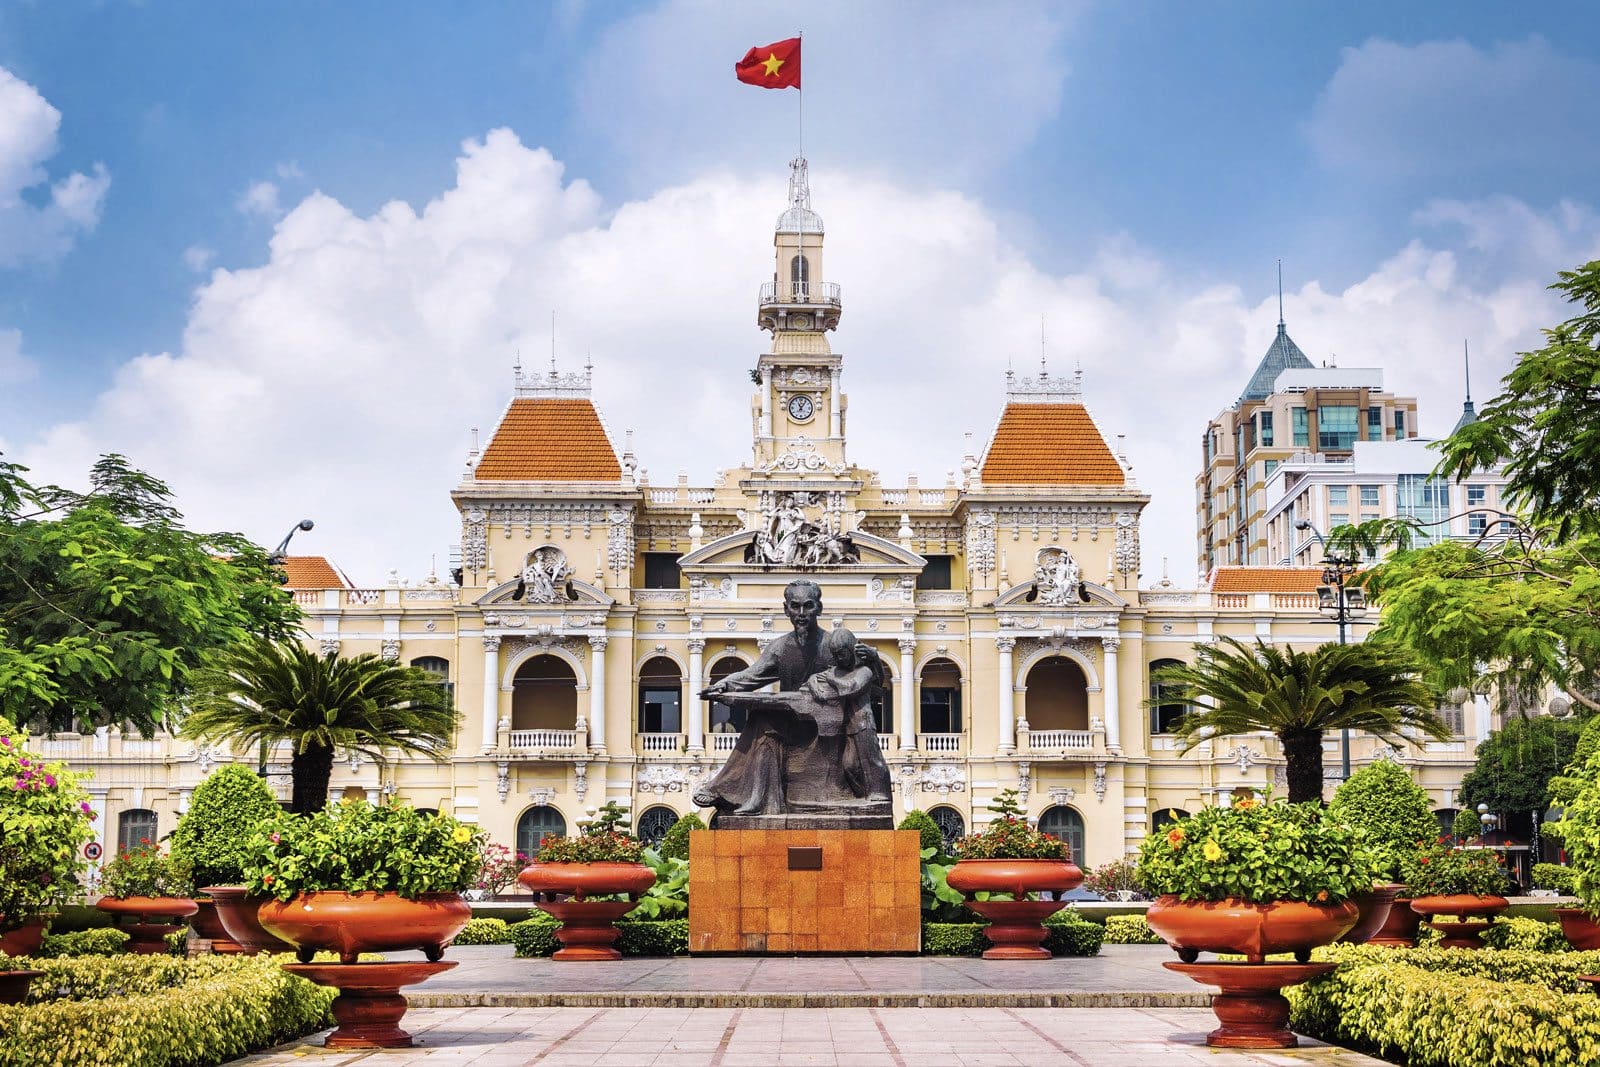 Ho Chi Minh City Hall, built in French colonial style for Saigon